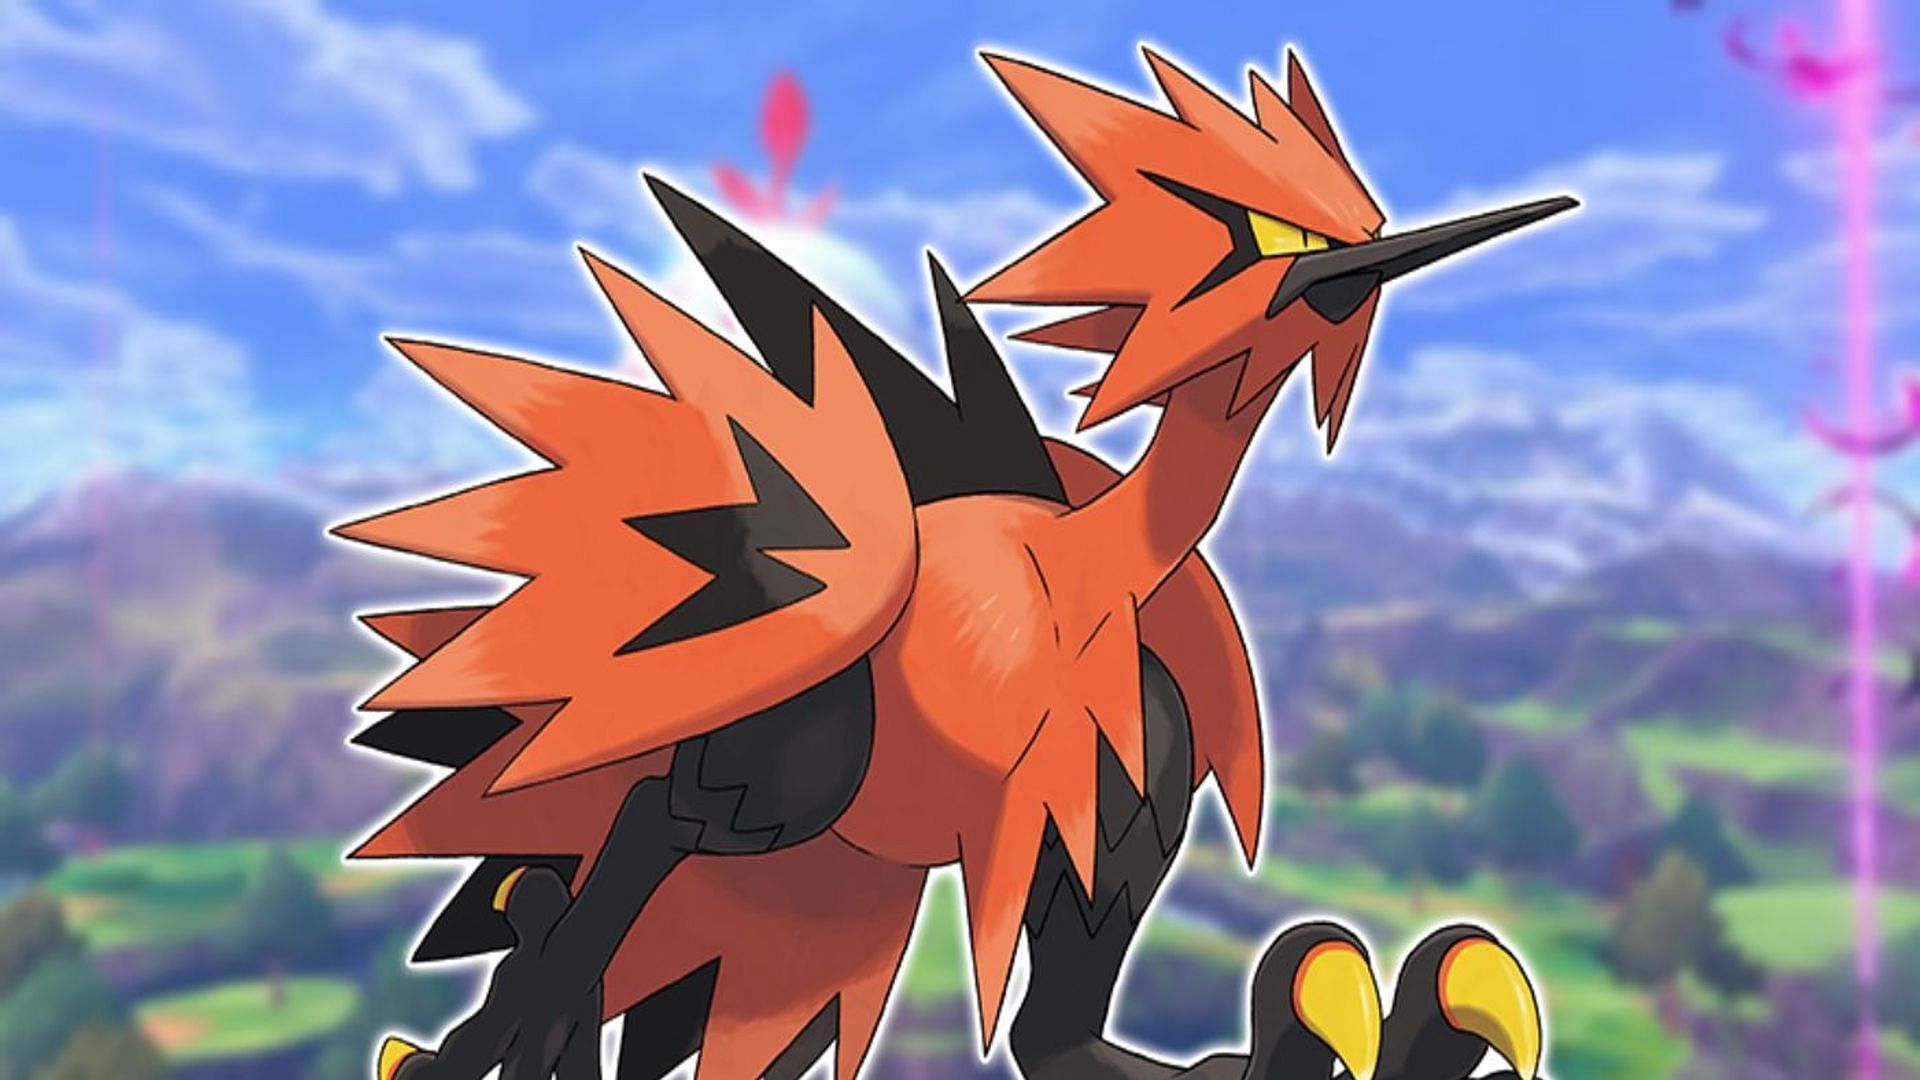 Another Galarian Zapdos! Another excellent throw! #Pokemon